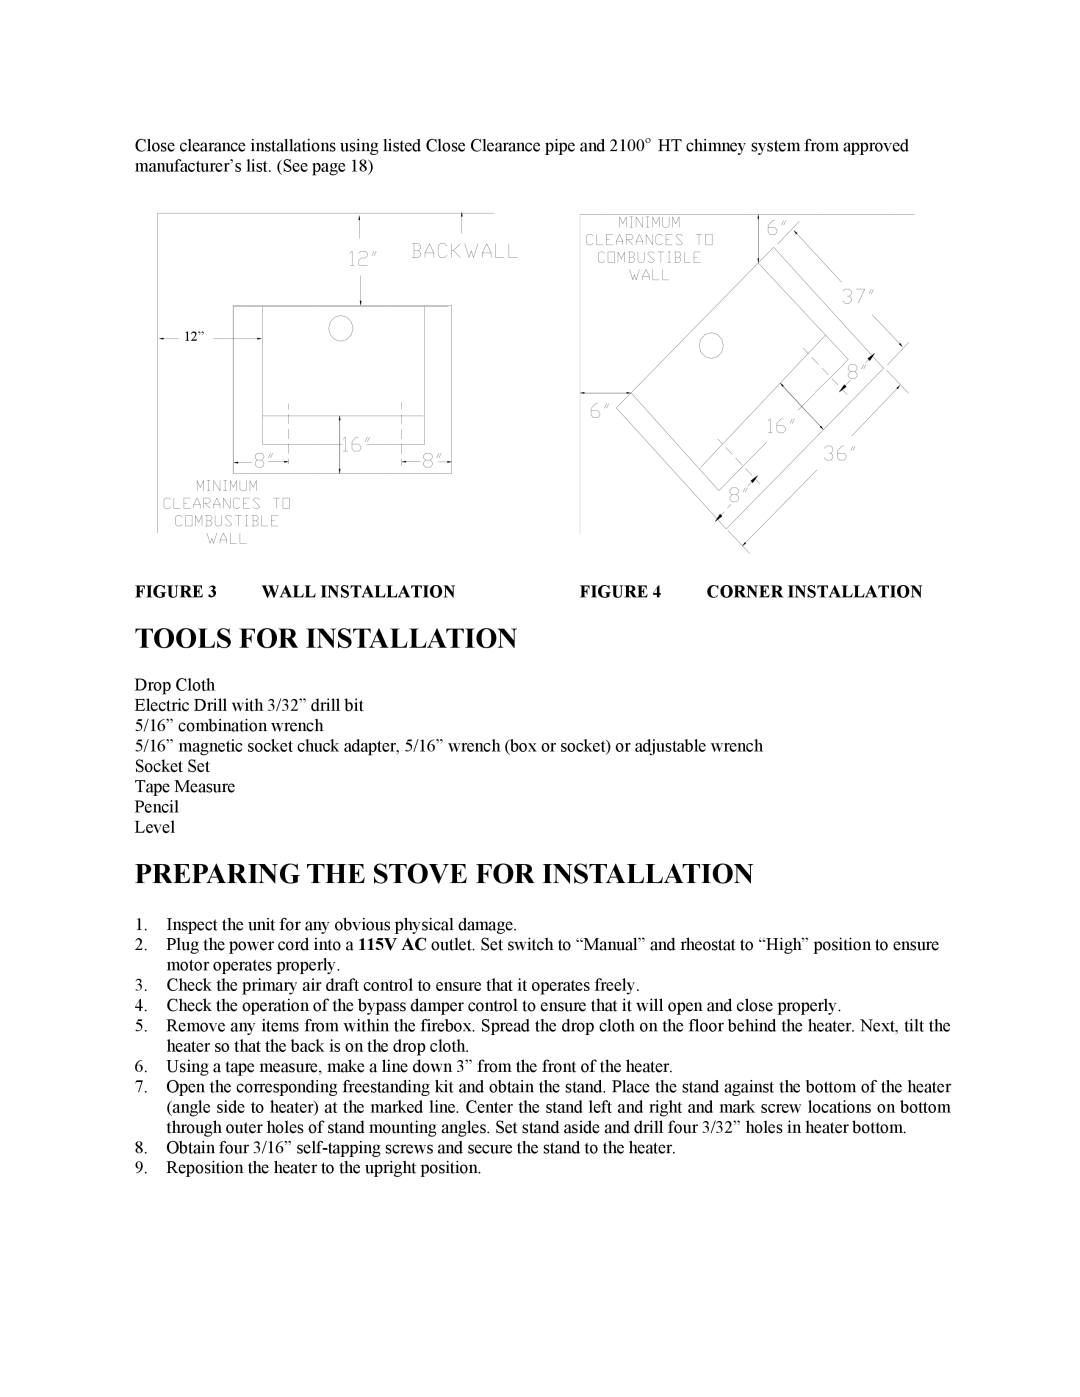 New Buck Corporation 20 Room Heater manual Tools For Installation, Preparing The Stove For Installation, Wall Installation 